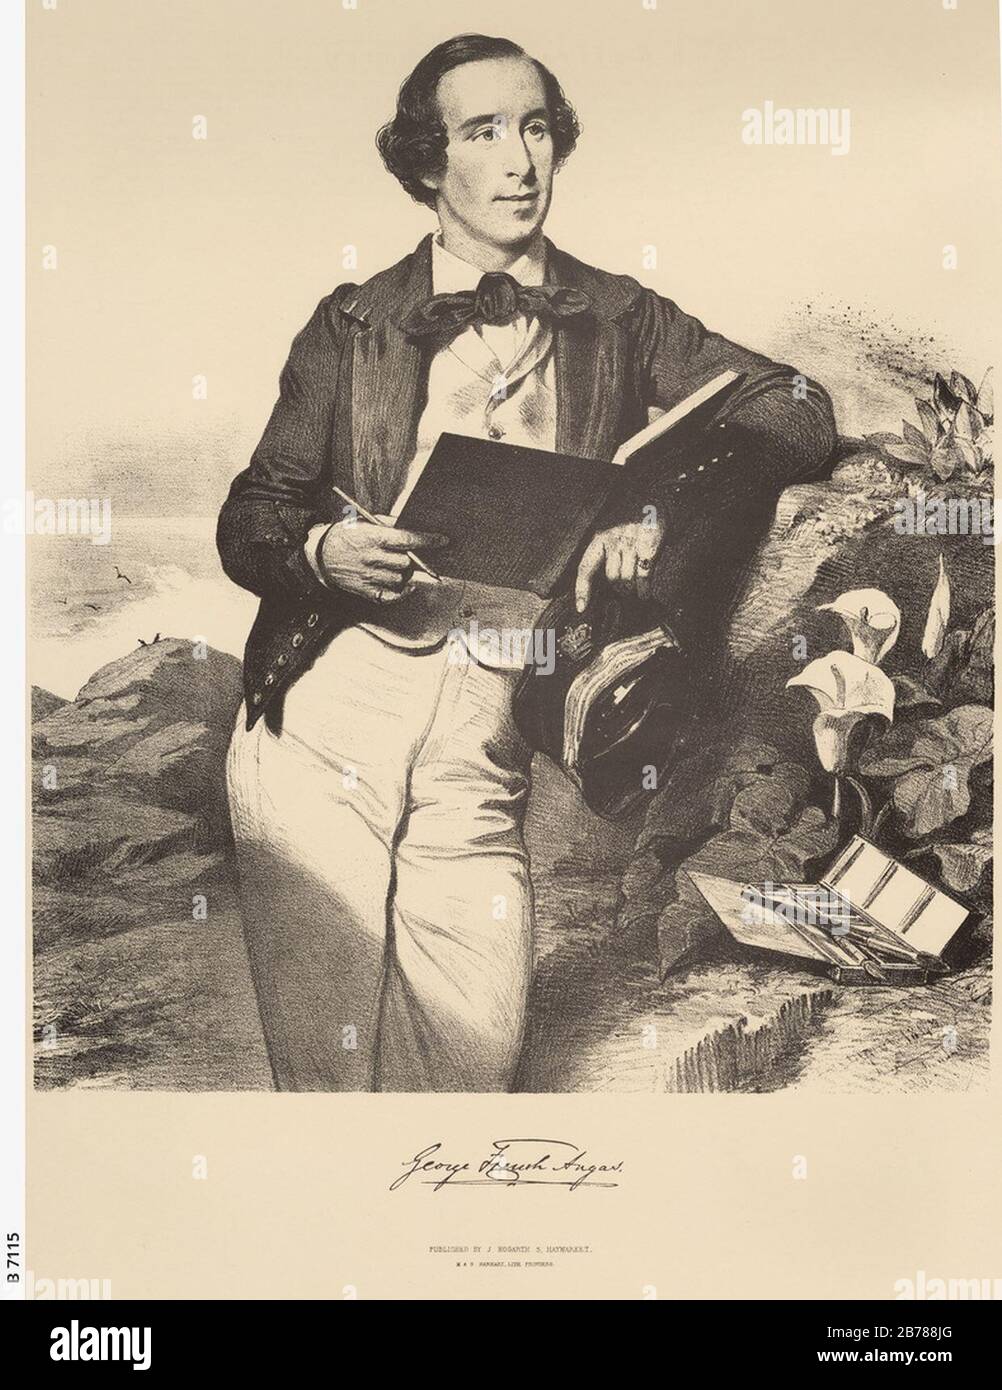 George French Angas, print by Charles Baugniet, 1849. Stock Photo